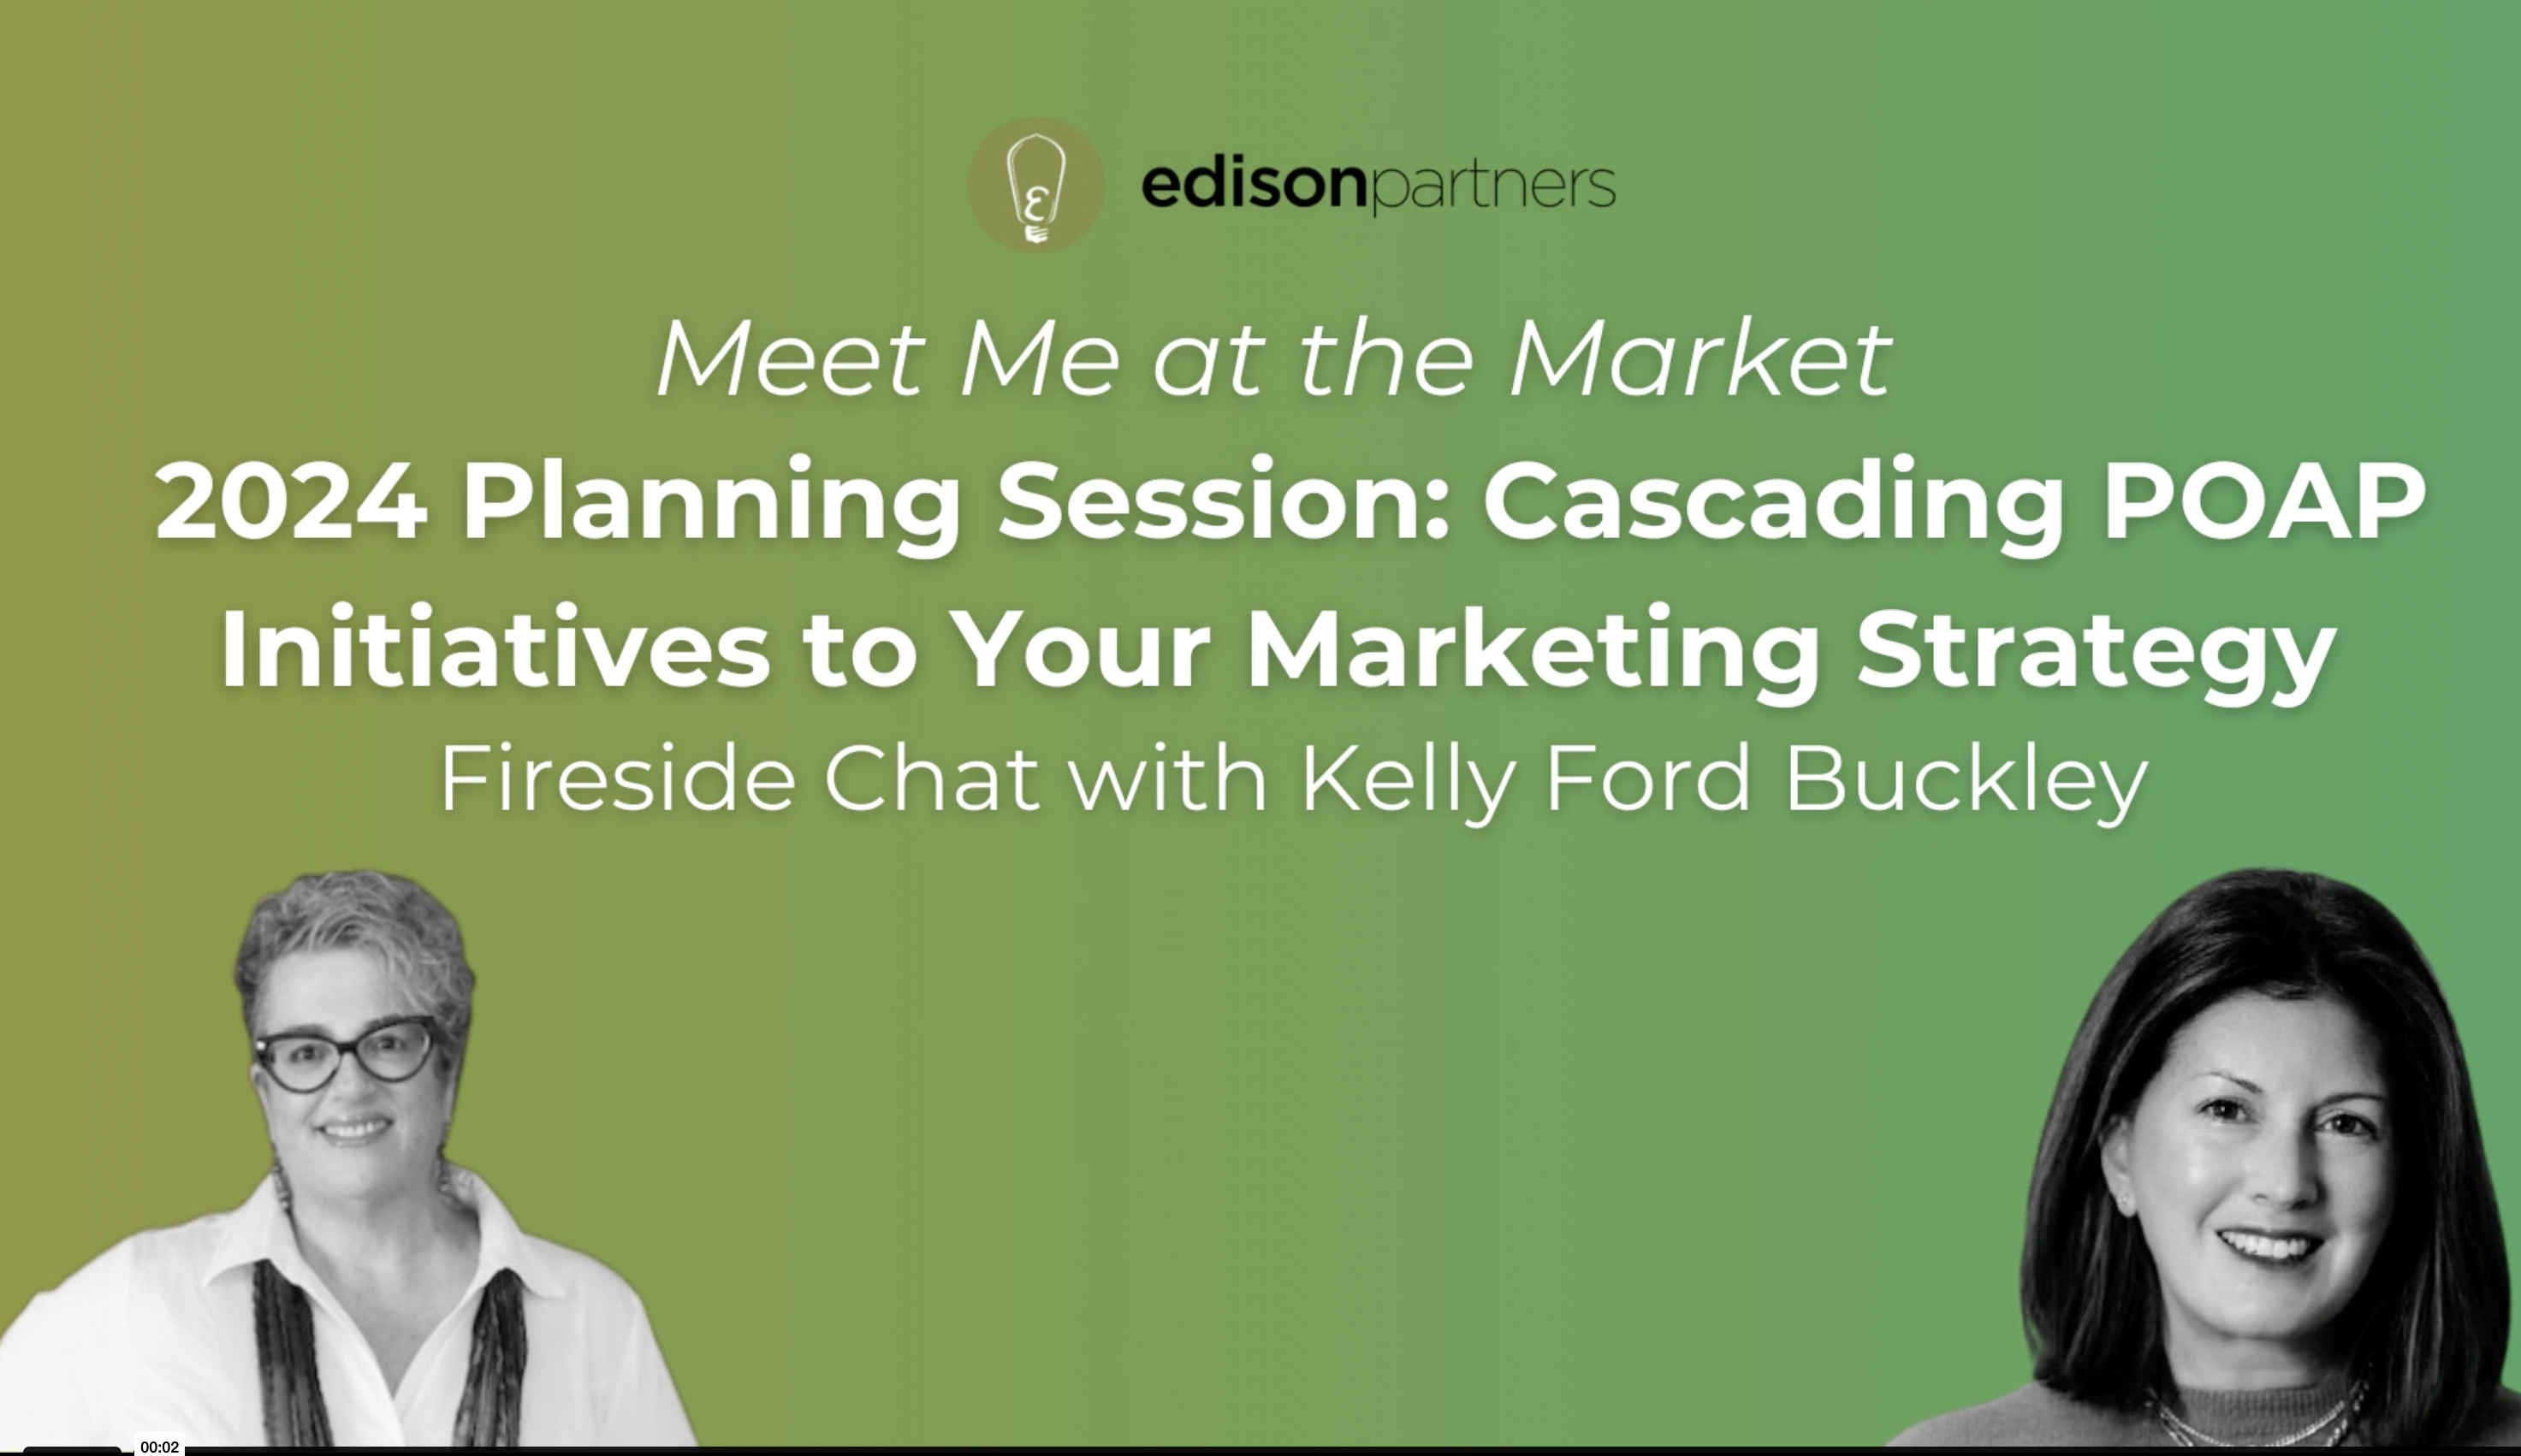 Go-To-Market Fireside Chat: Cascading POAP Initiatives to Your Marketing Strategy